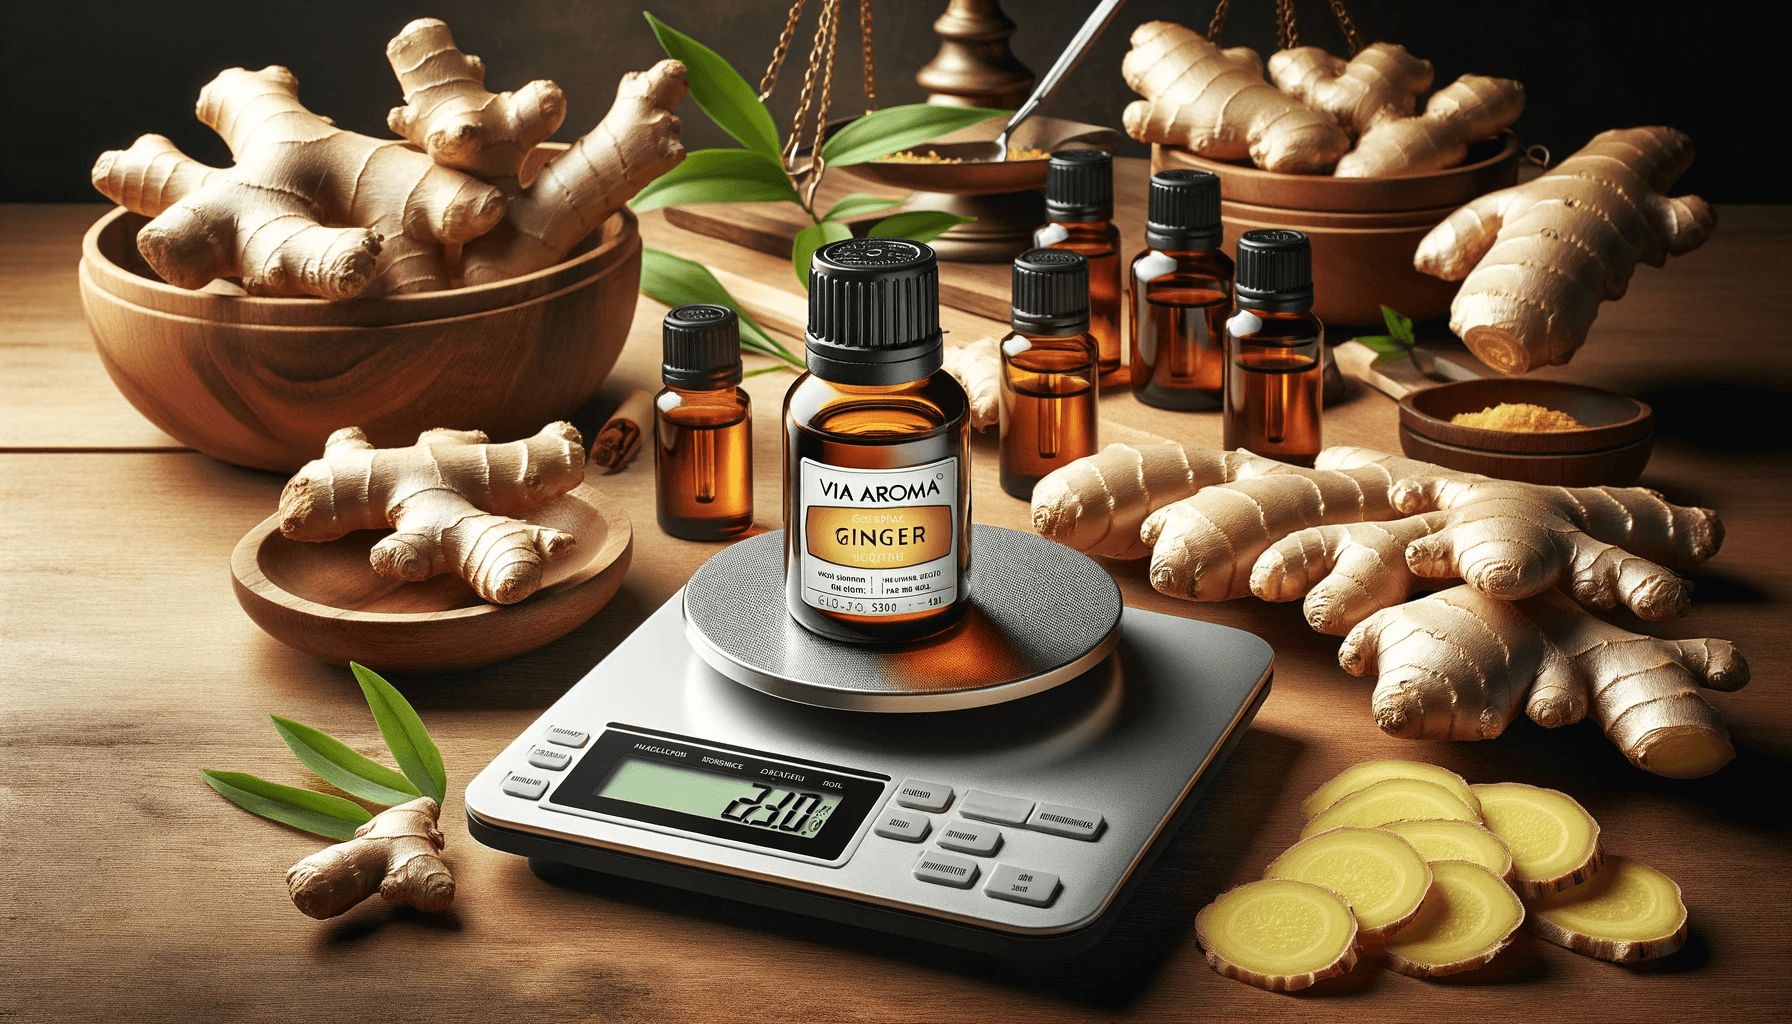 DALL·E 2024 01 23 15.16.01 Create a balanced and harmonious composition featuring Via Aroma ginger essential oil alongside fresh ginger roots and a precision scale. The scene p